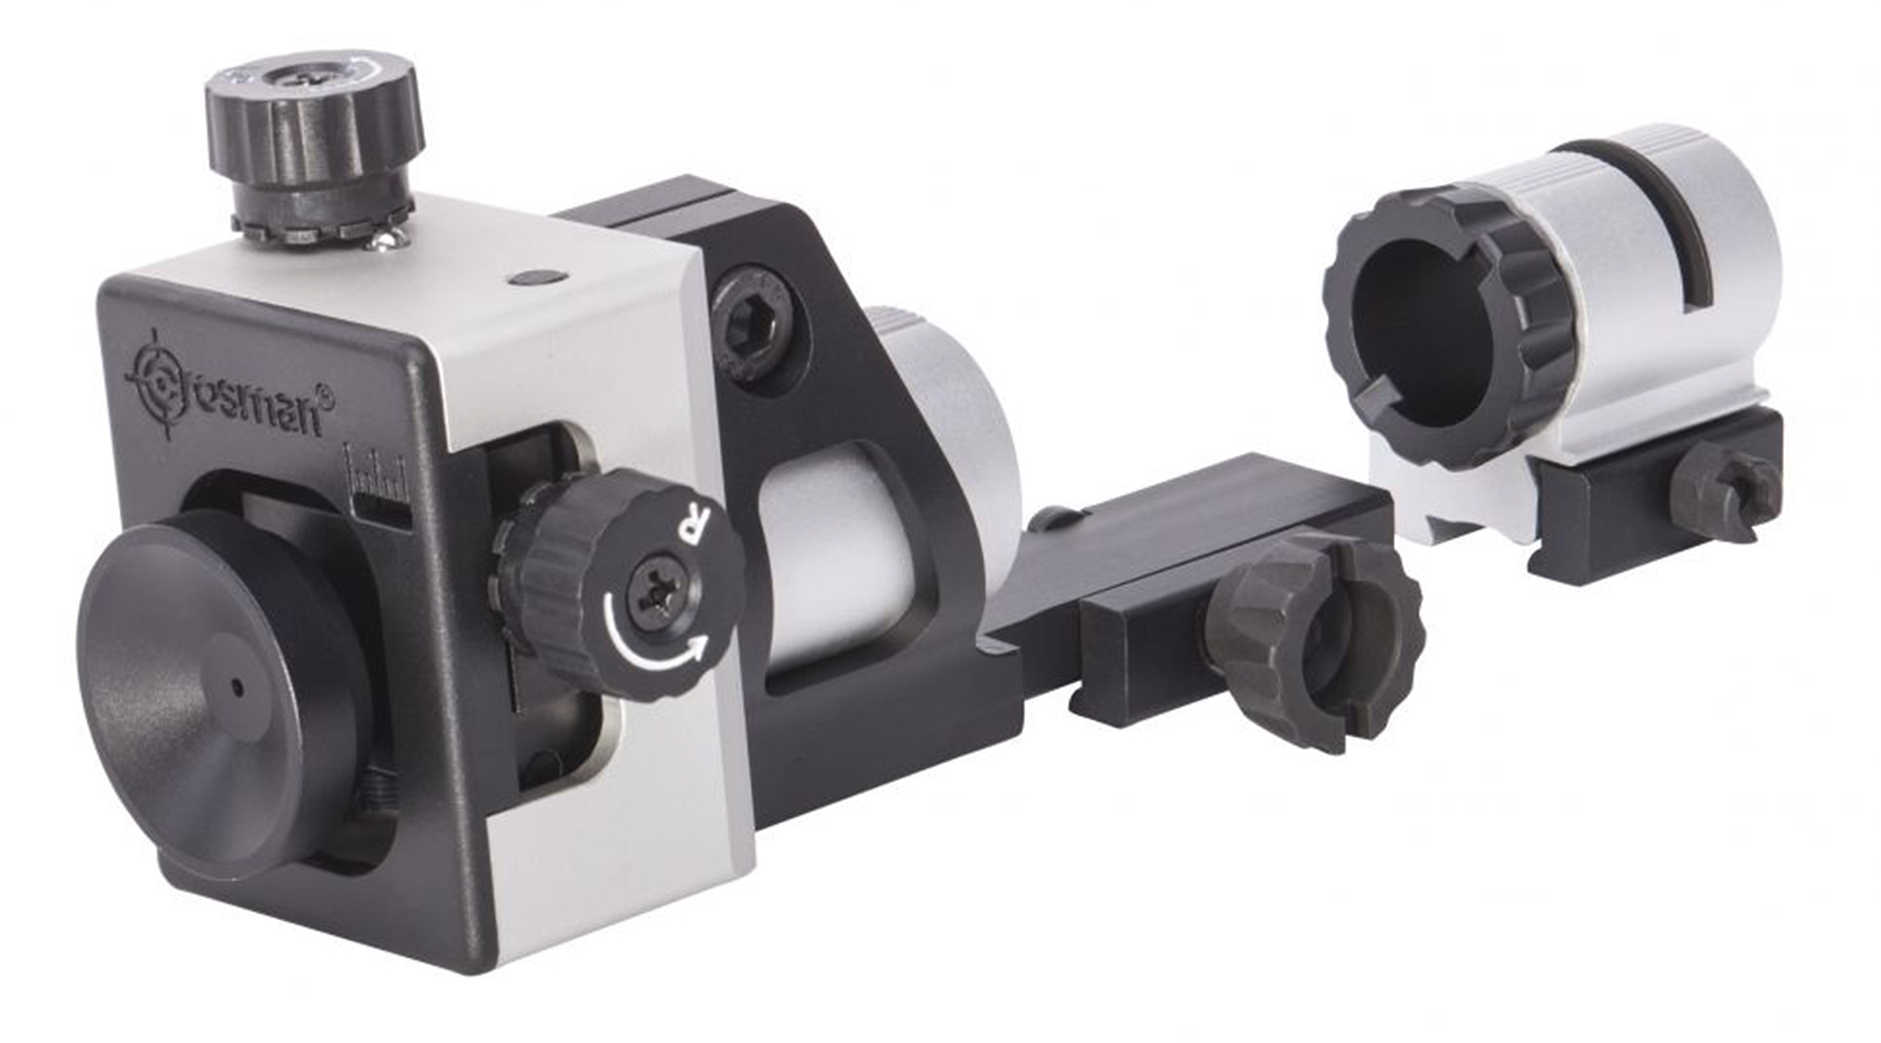 Adjustable Precision Diopter Sight System